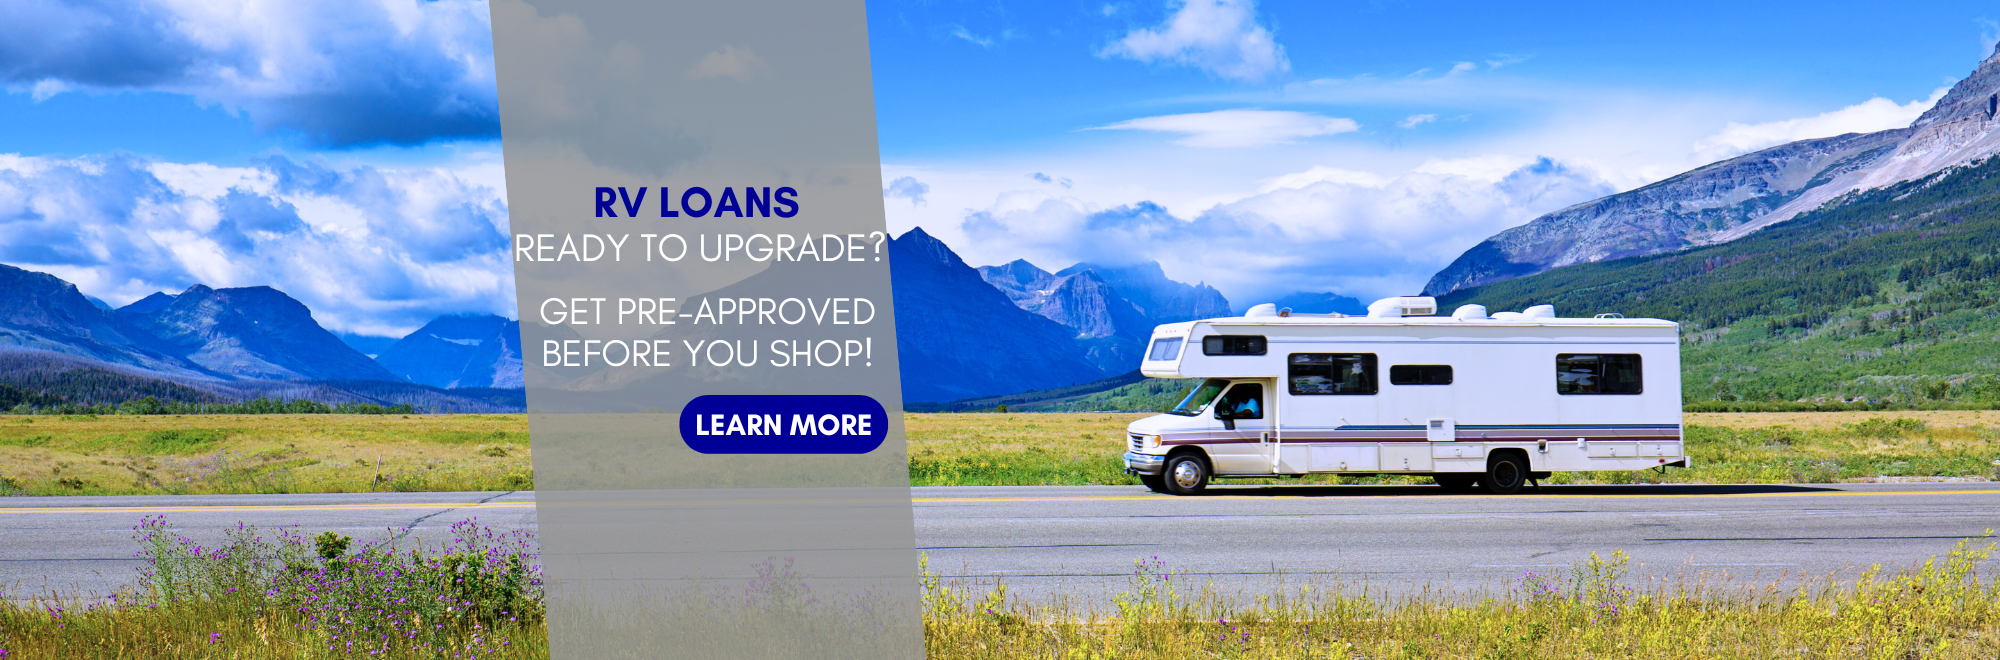 RV LOANS Ready to upgrade? Get per-approved before you shop!